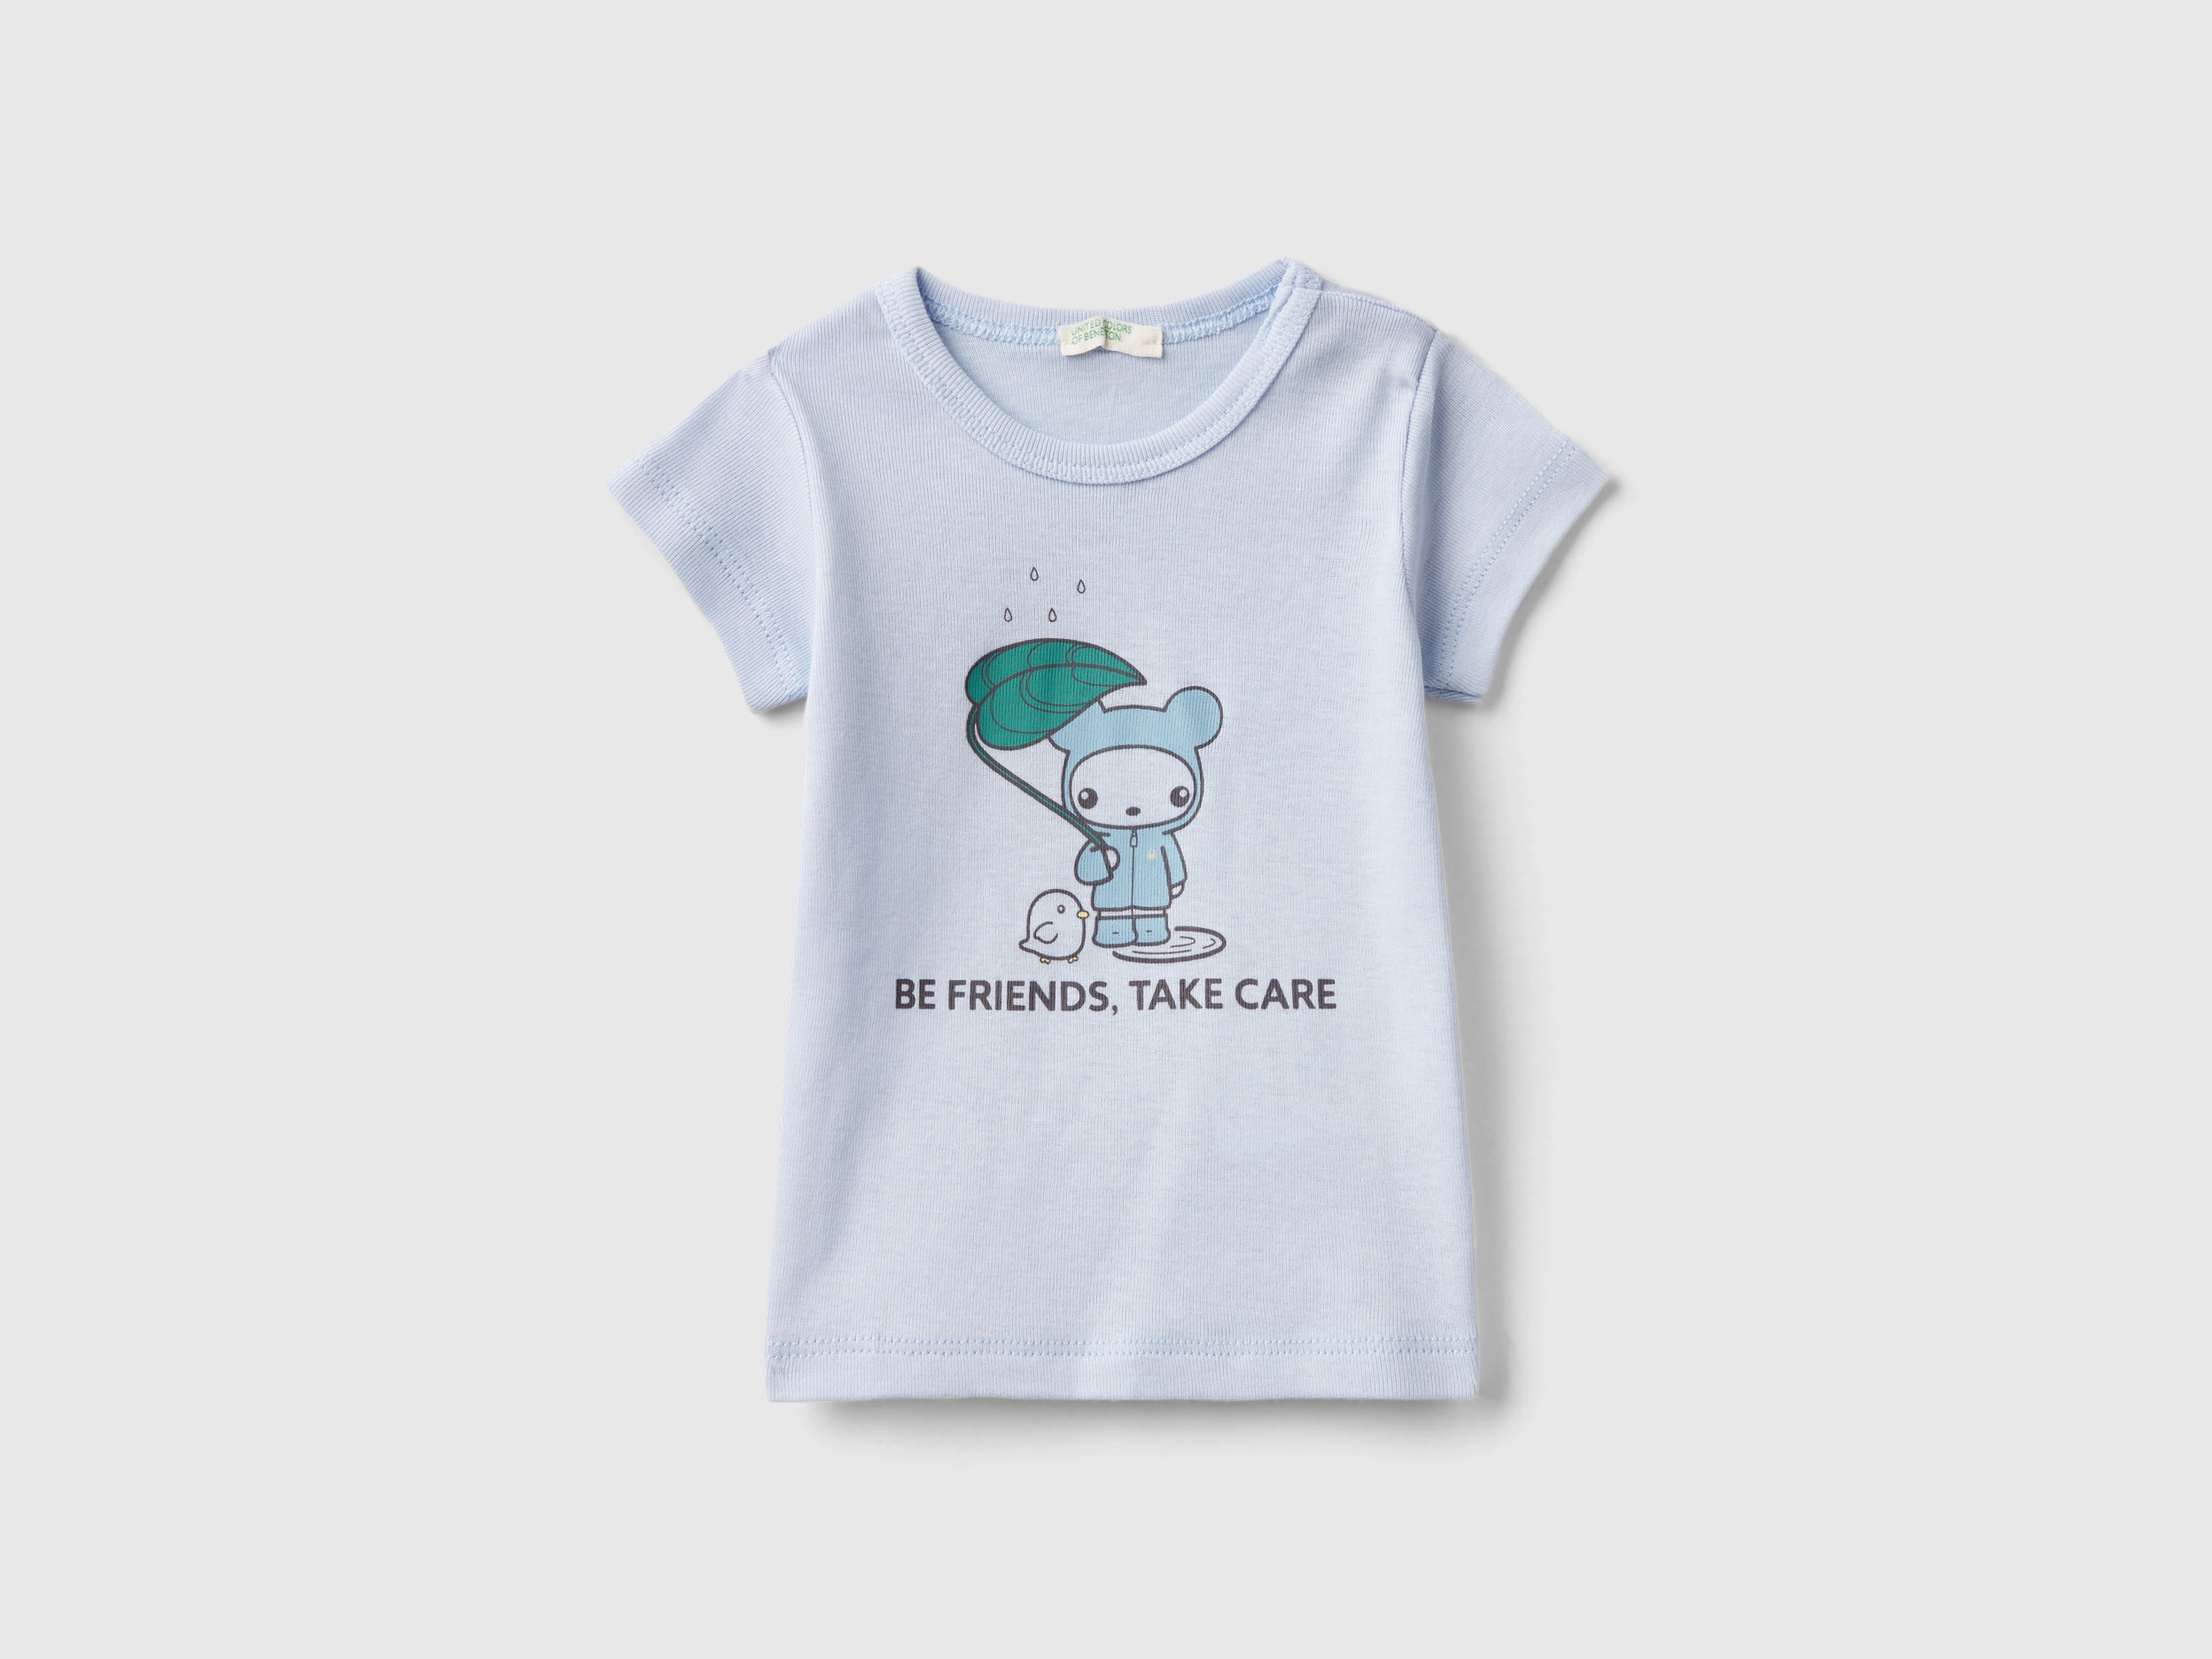 Image of Benetton, T-shirt In 100% Organic Cotton, size 62, Sky Blue, Kids